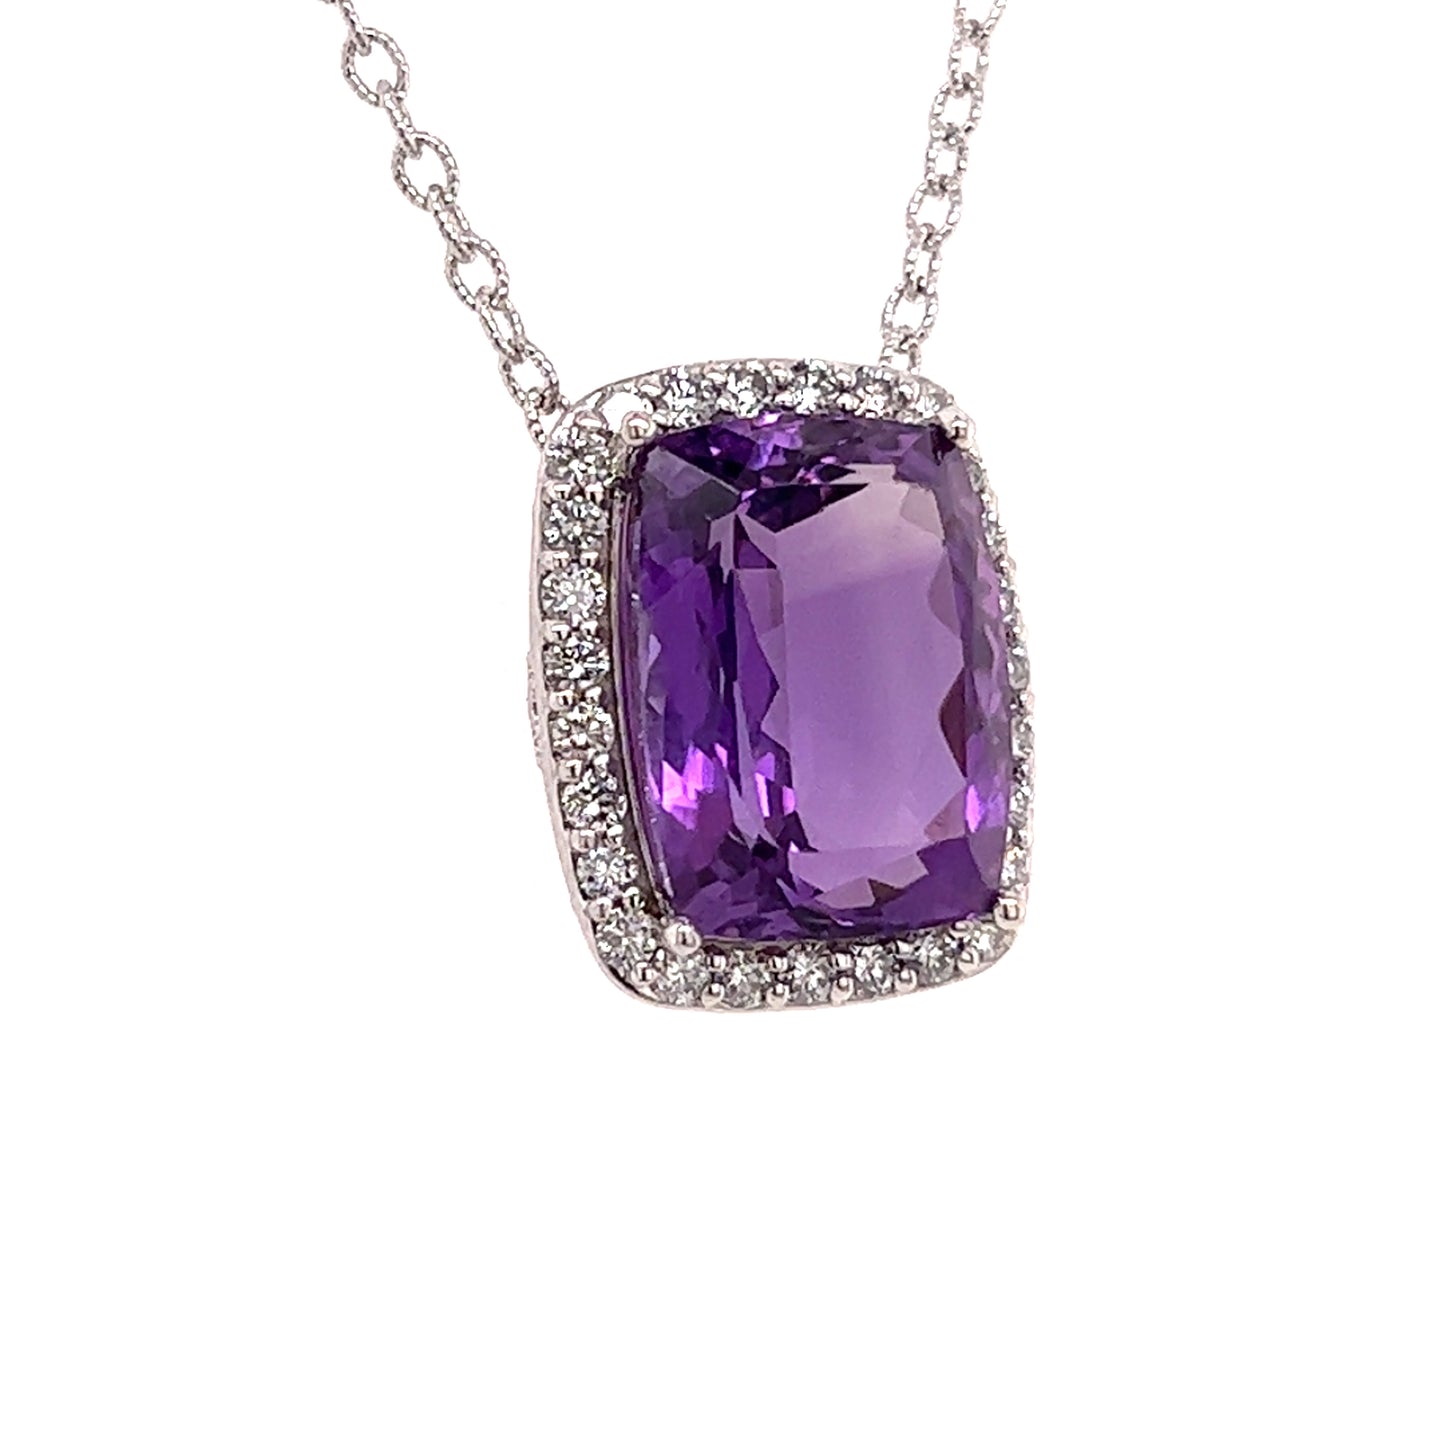 Natural Amethyst Diamond Necklace 14k Gold 14.73 TCW Certified $5,550 215436